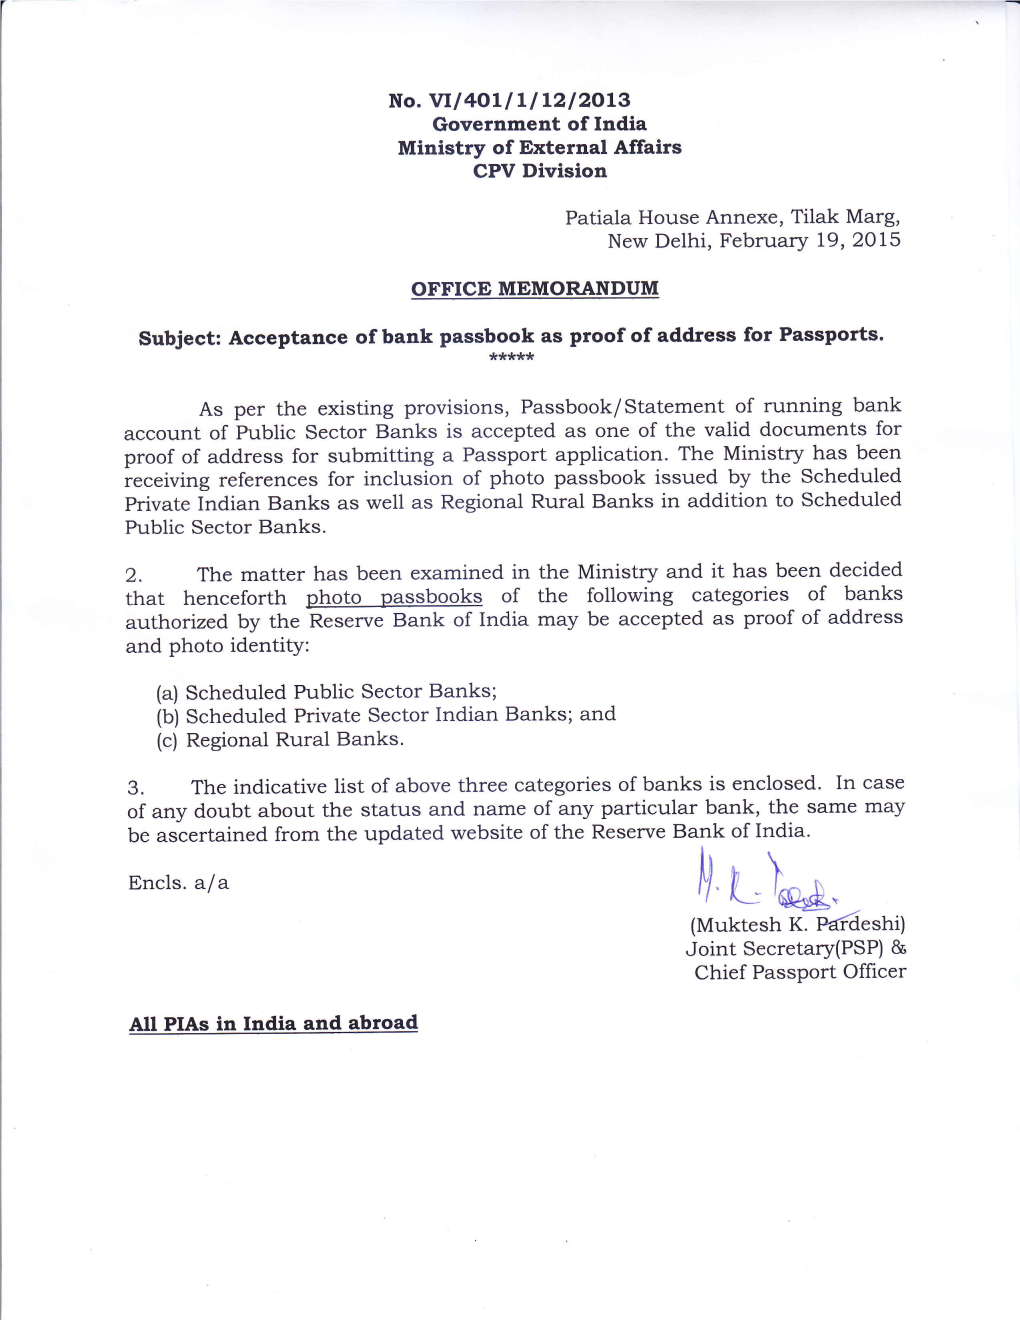 Acceptance of Bank Passbook As Proof of Address for Passports